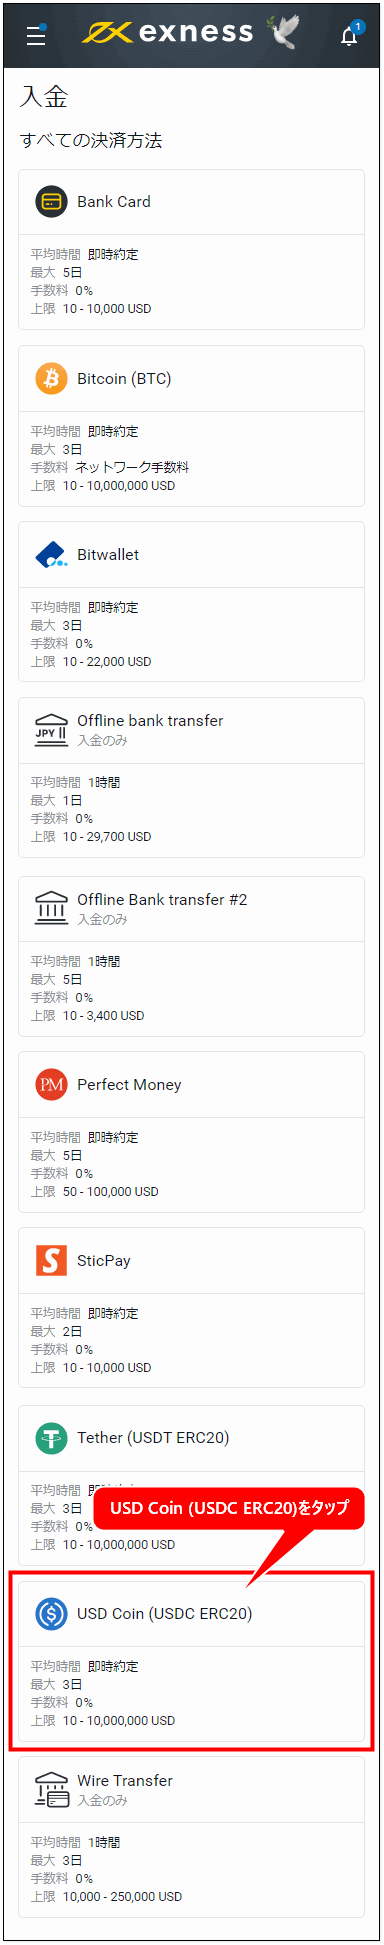 Exness_入金_USD Coinを選択_mb1